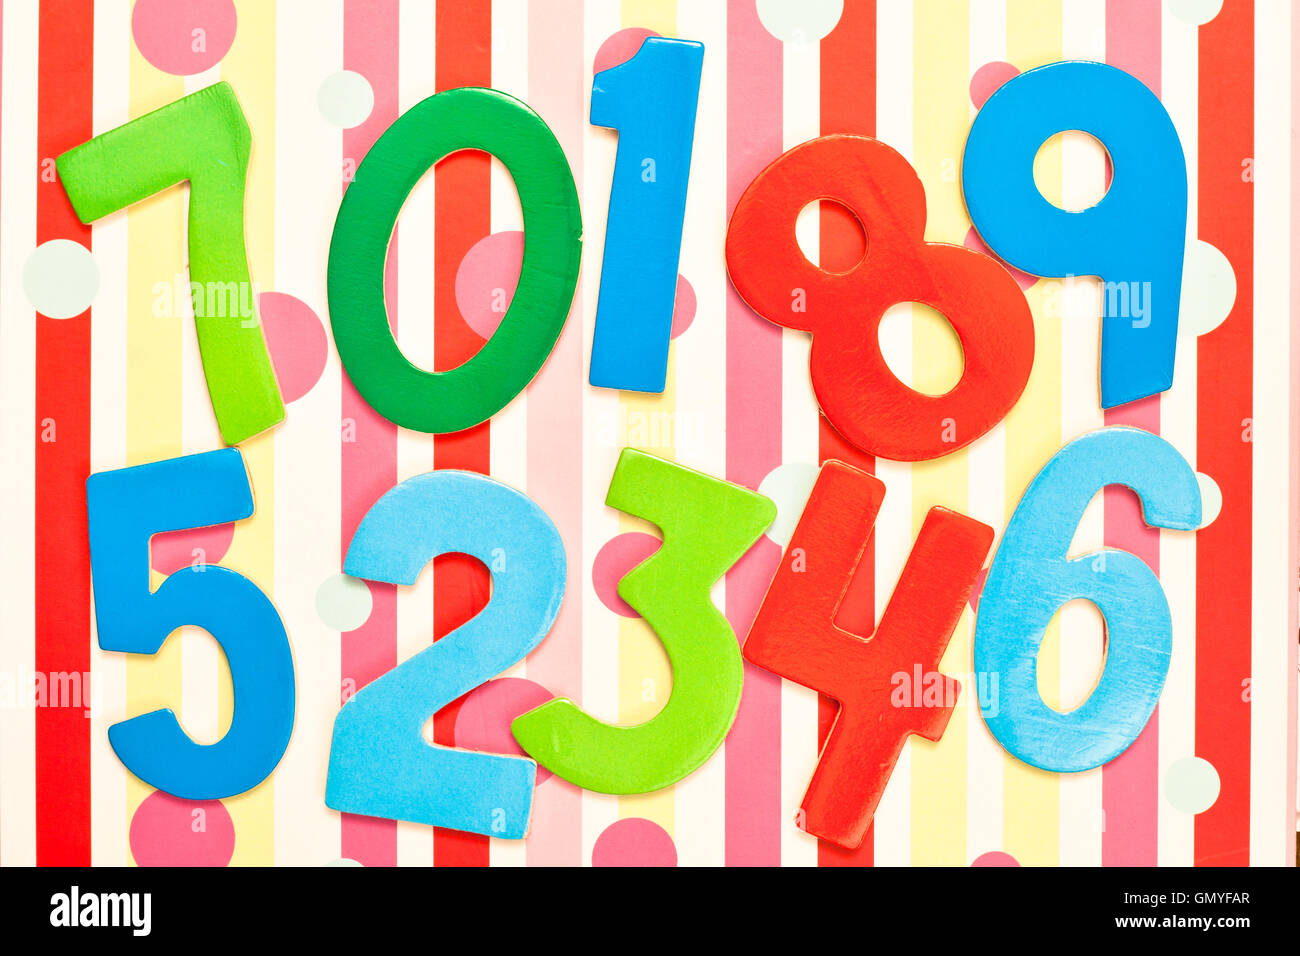 Colourful numbers Stock Photo